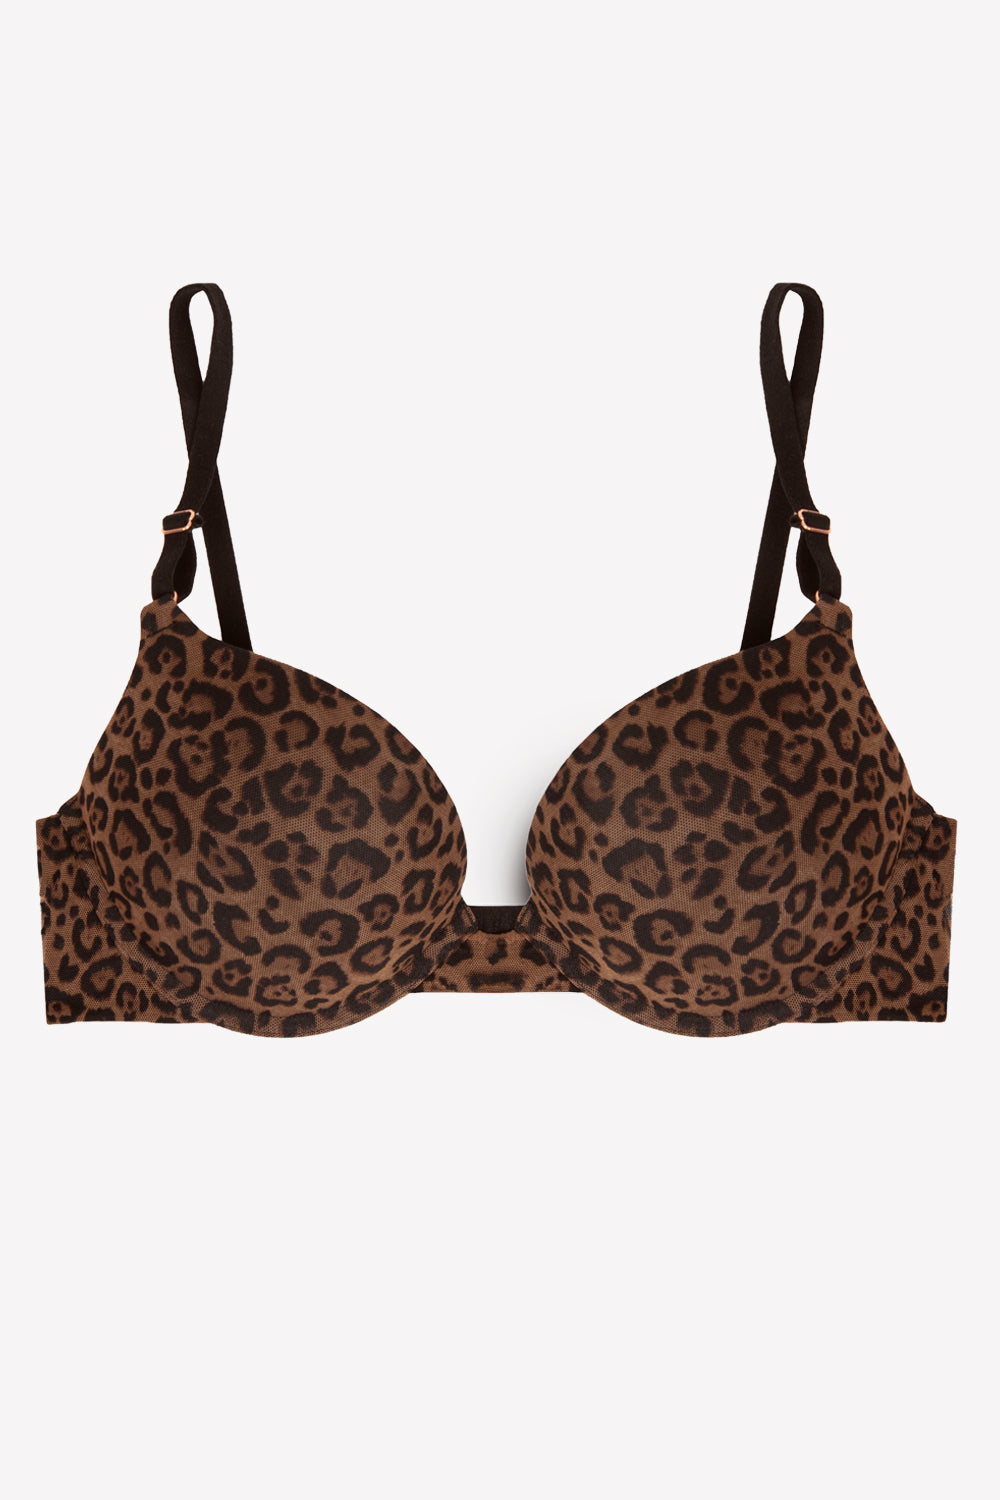 Miorre Leopard Push-up Bra and Panty Set (75B) price in UAE